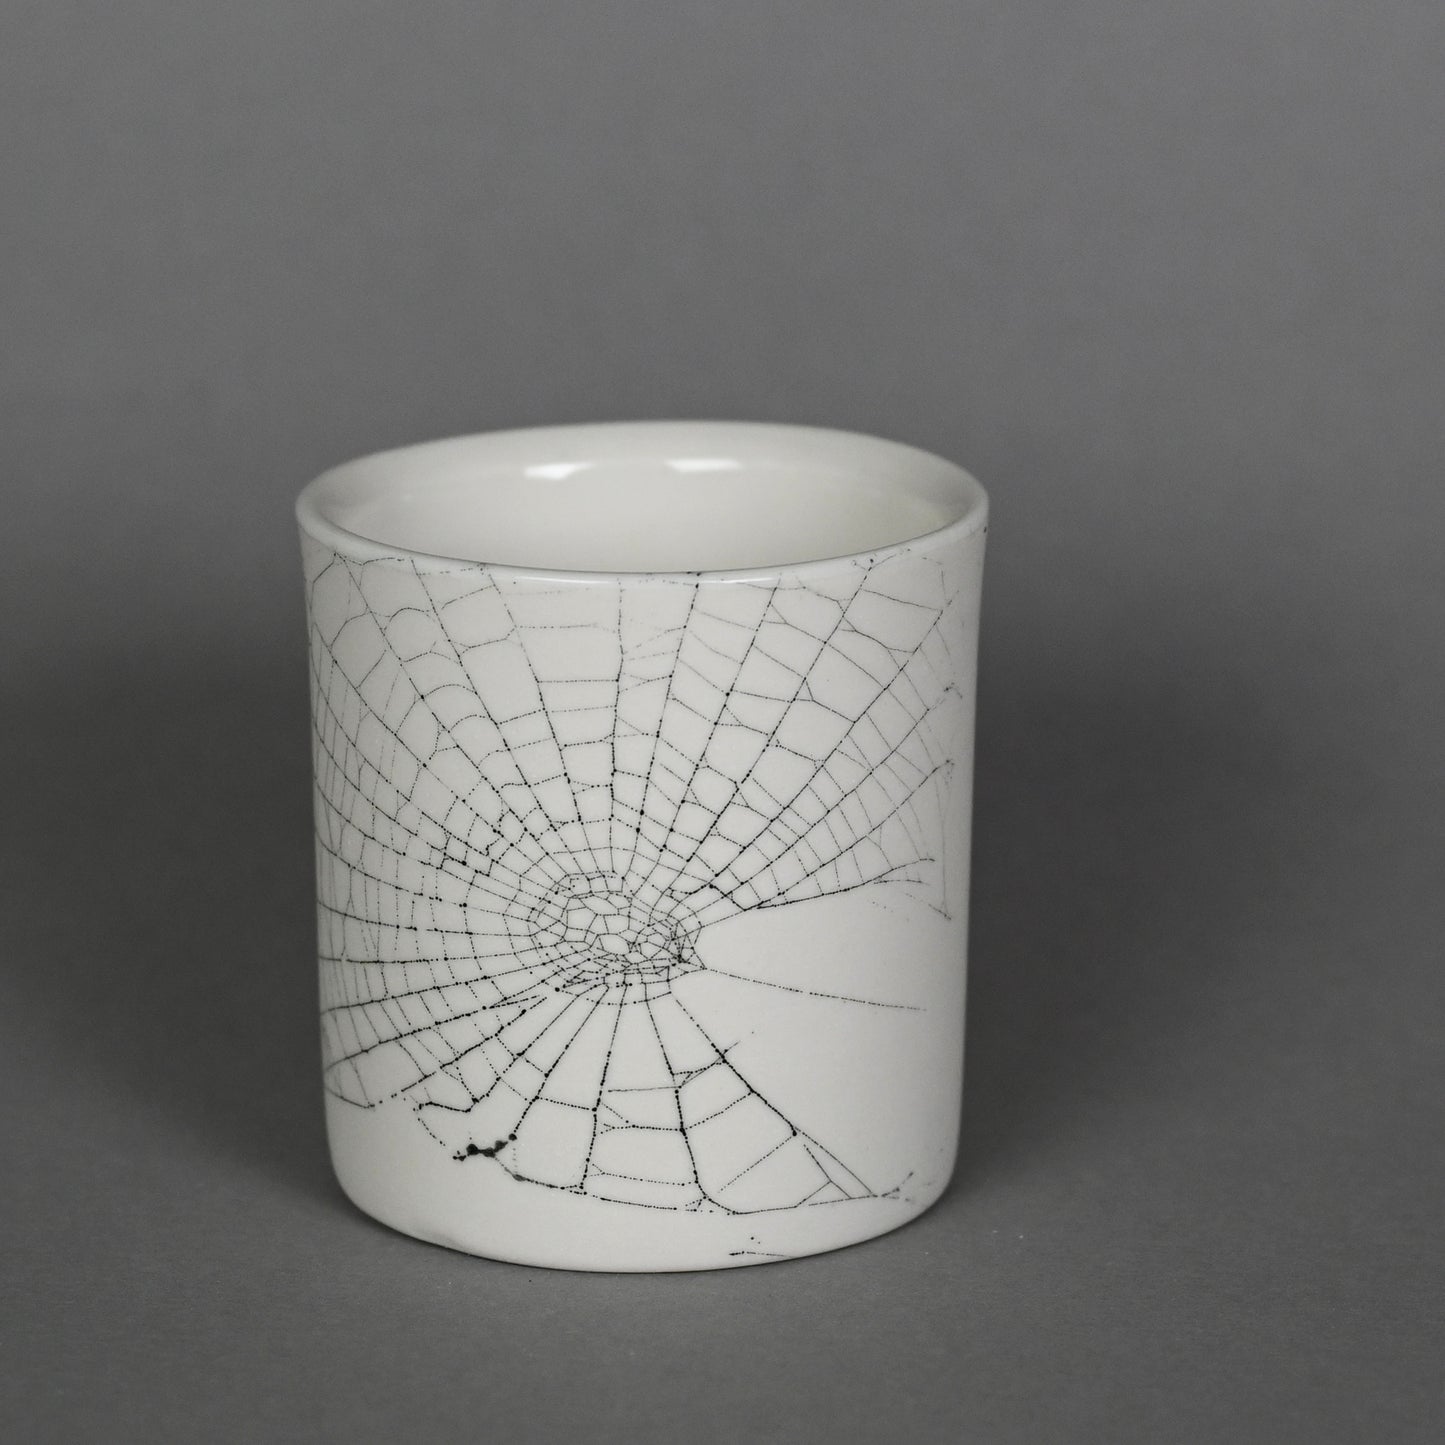 Web on Clay (218), Collected October 01, 2022